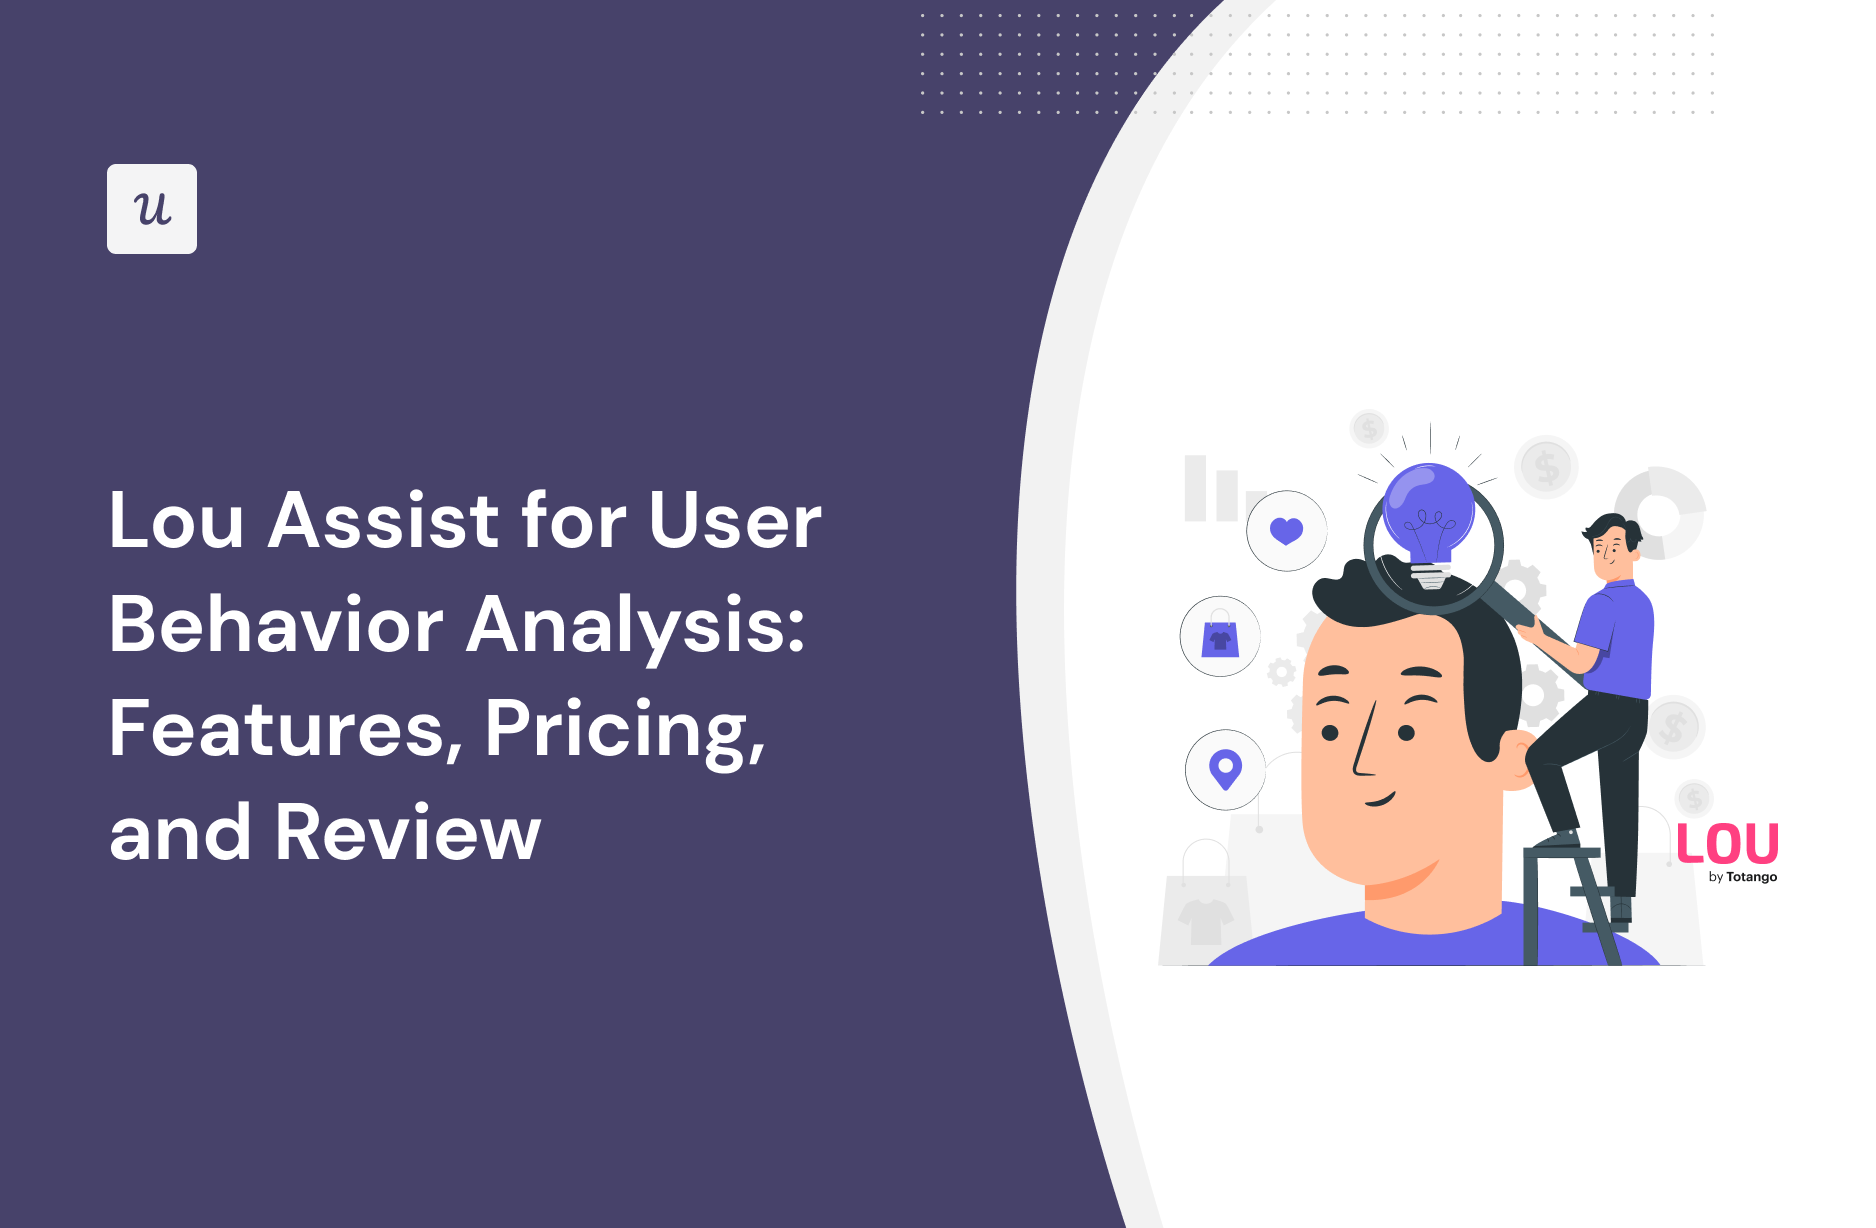 Lou Assist for User Behavior Analysis: Features, Pricing, and Review